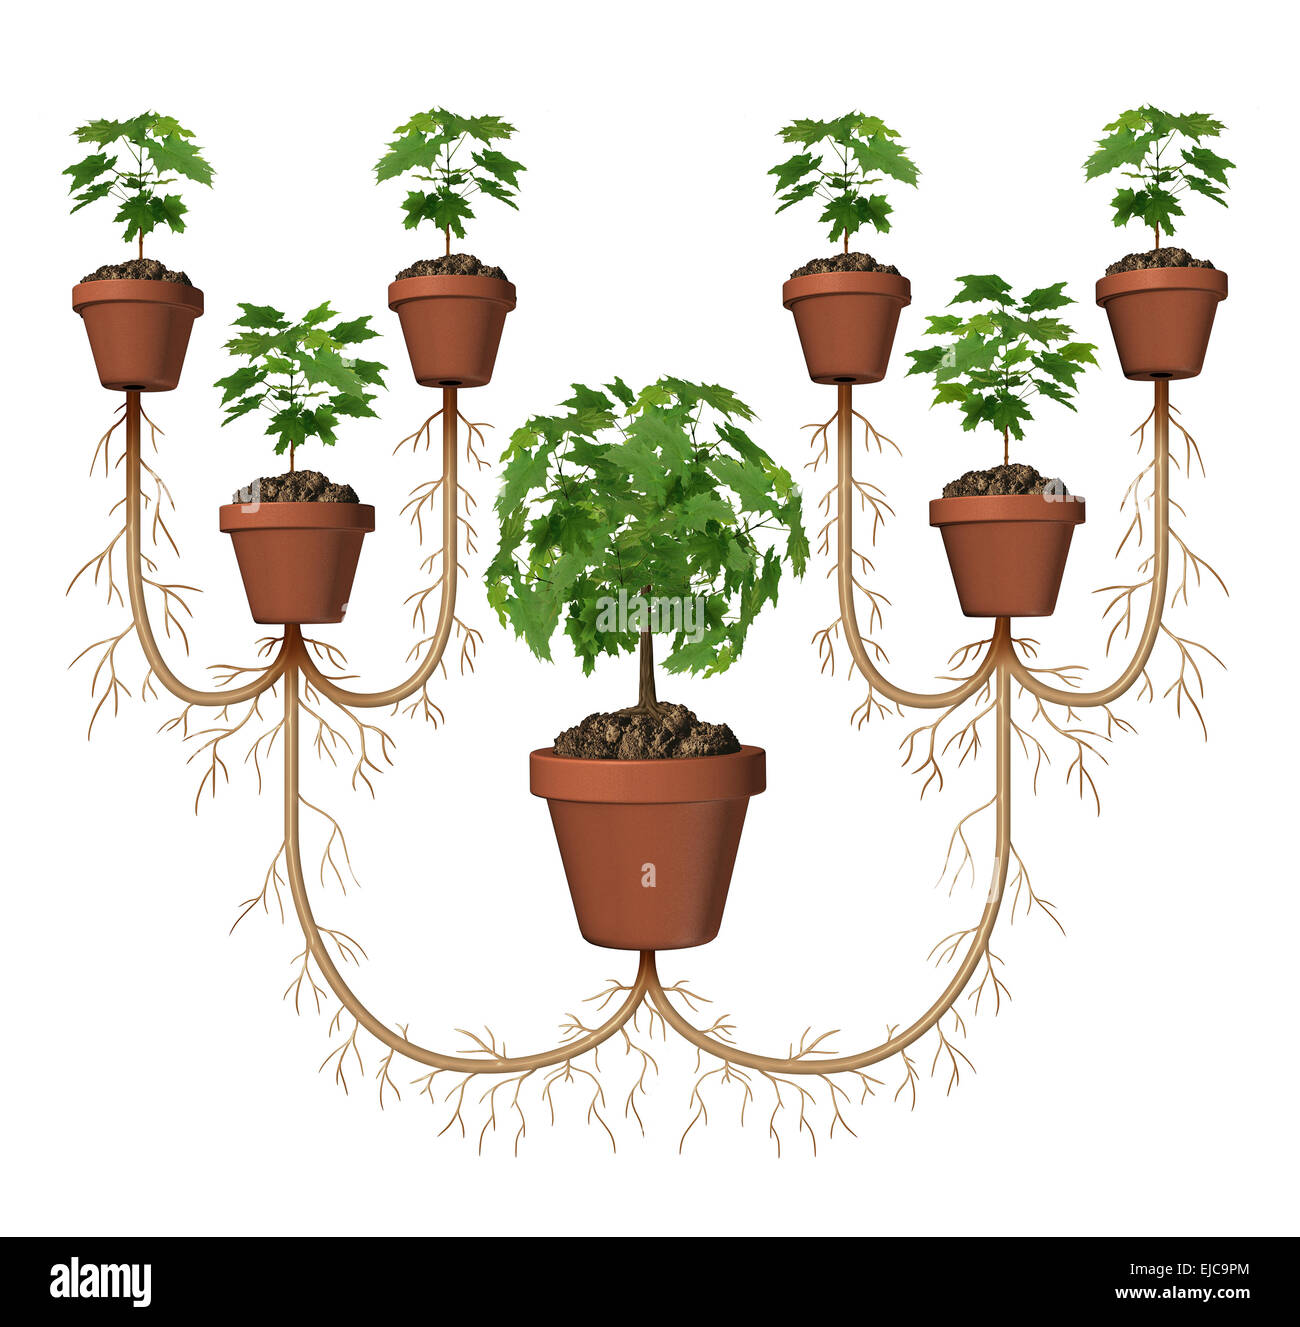 Multiplying profits and compound growth investing business diagram concept as a tree in a planting pot expanding with a group of new saplings as a symbol for expansion and success. Stock Photo